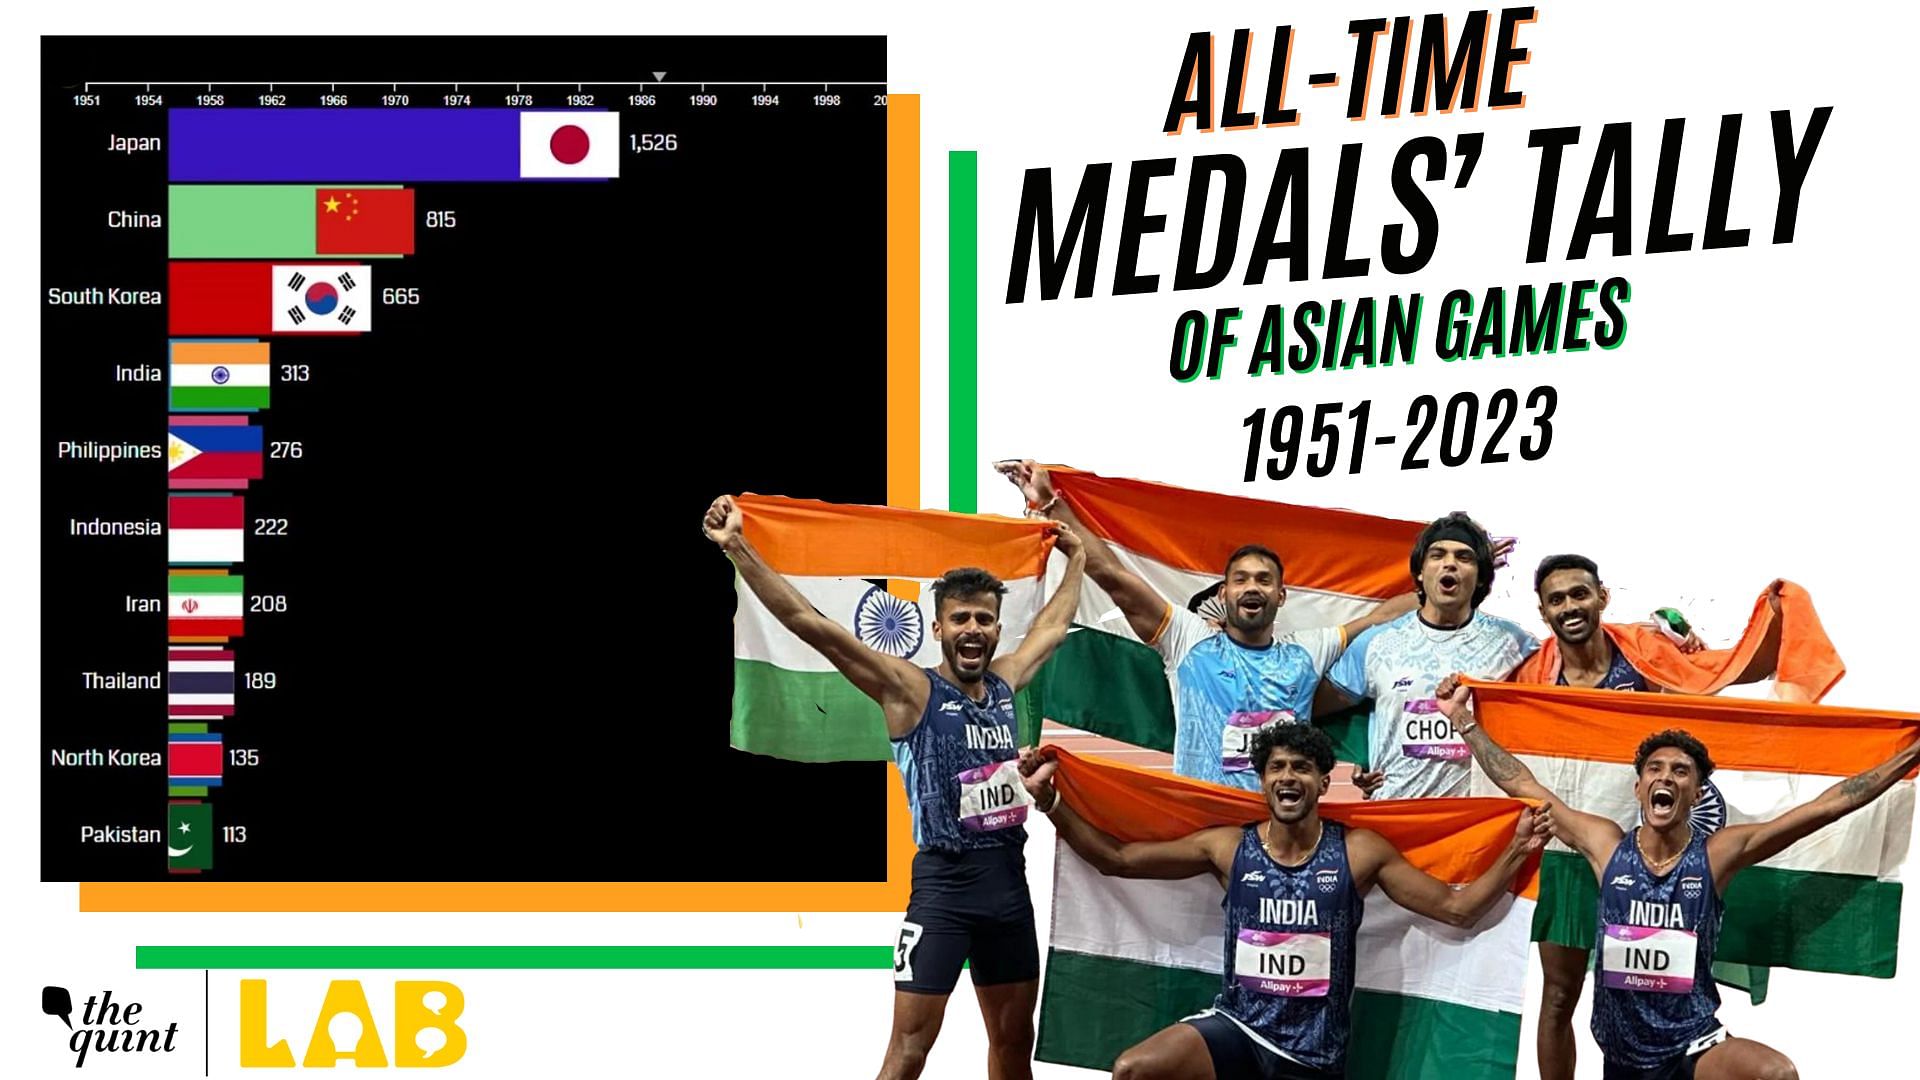 Asian Games Which Countries are Ahead of India in the AllTime Medals